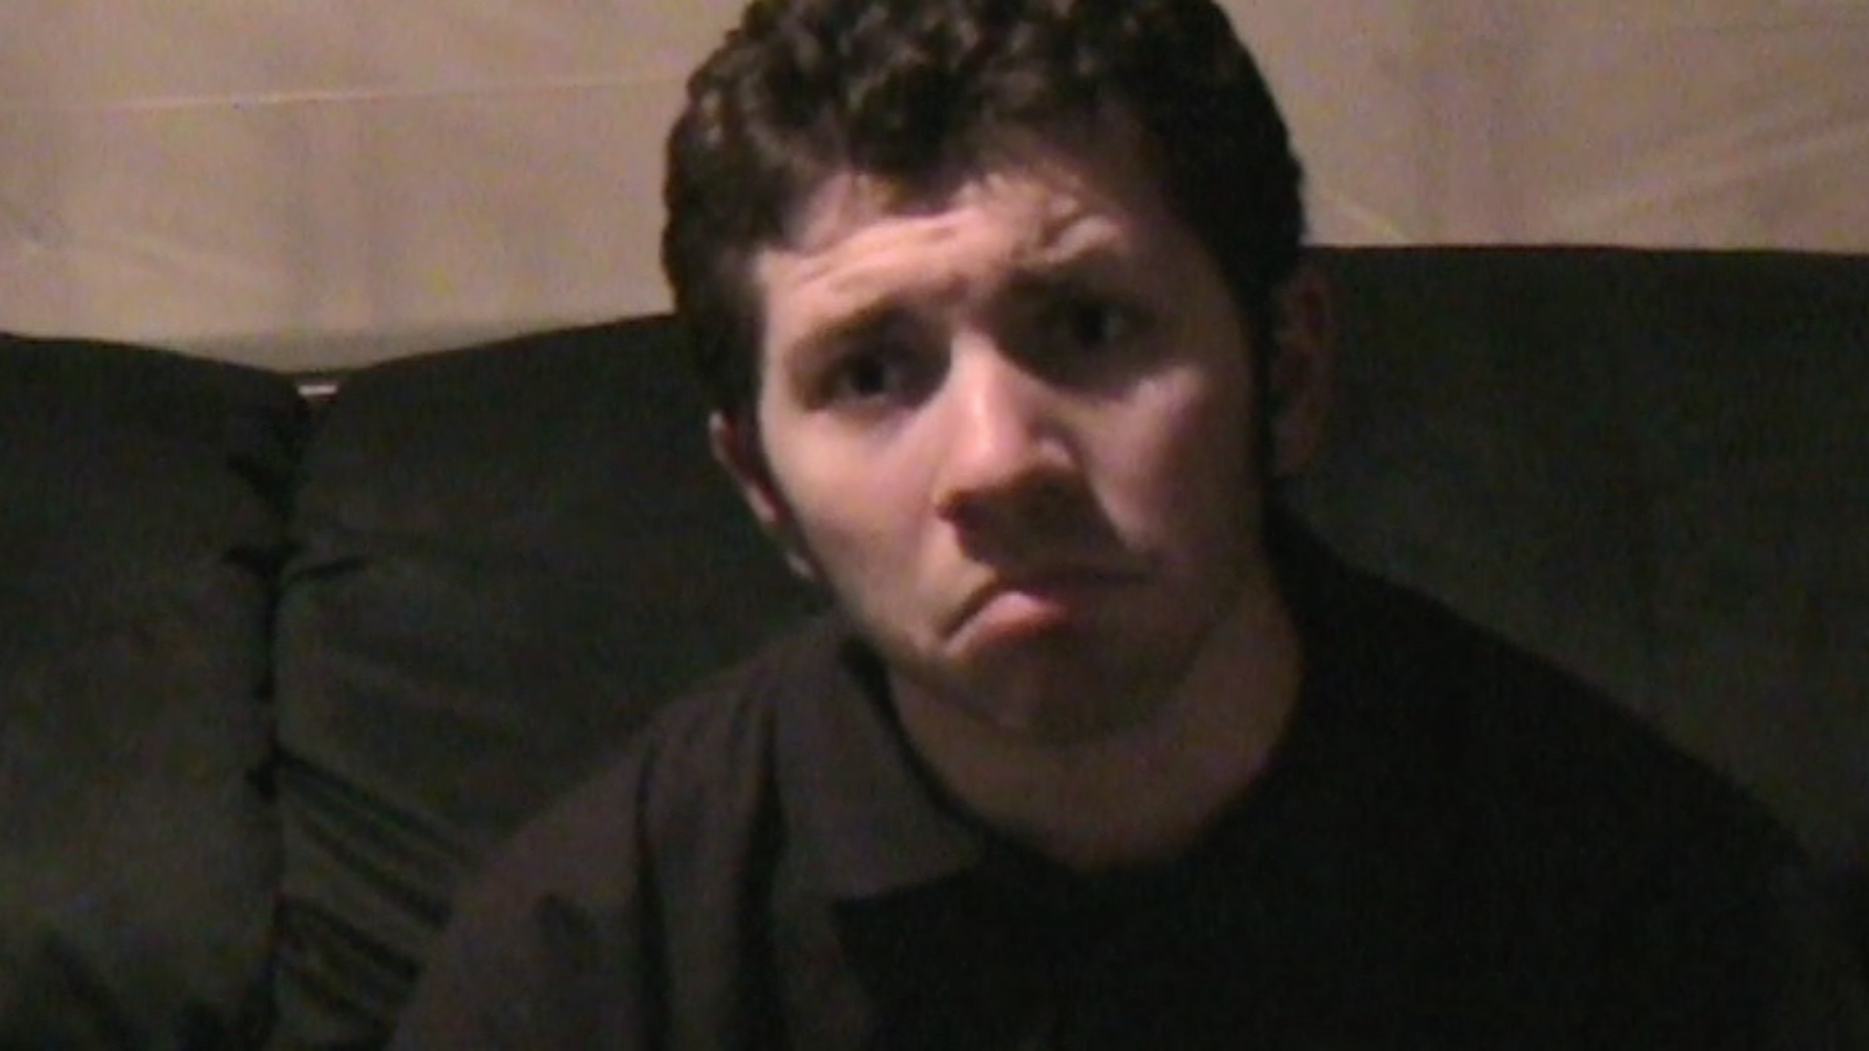 A screenshot from a video where Bryce Kalal is sitting on a couch, leaning forward, and pouting at something off-screen.